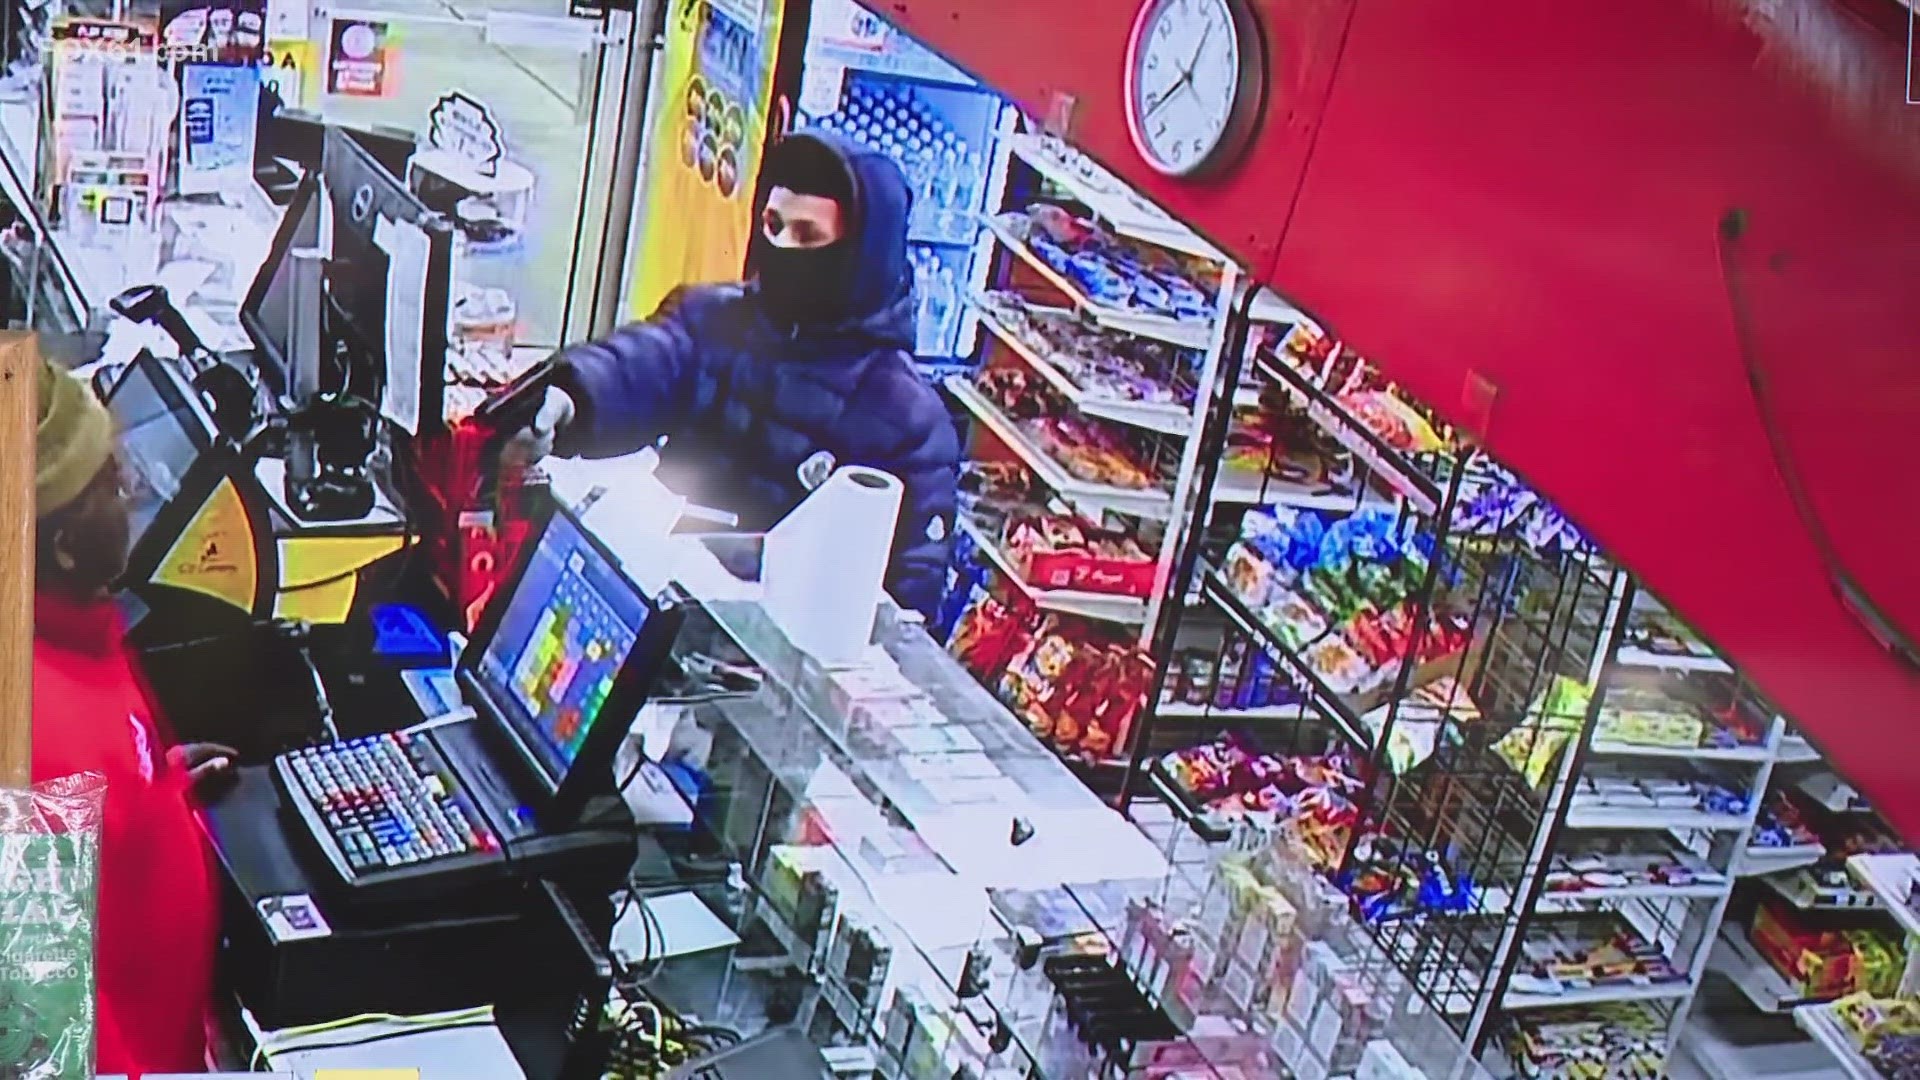 Gas stations across multiple Connecticut towns were hit by thieves early Sunday.